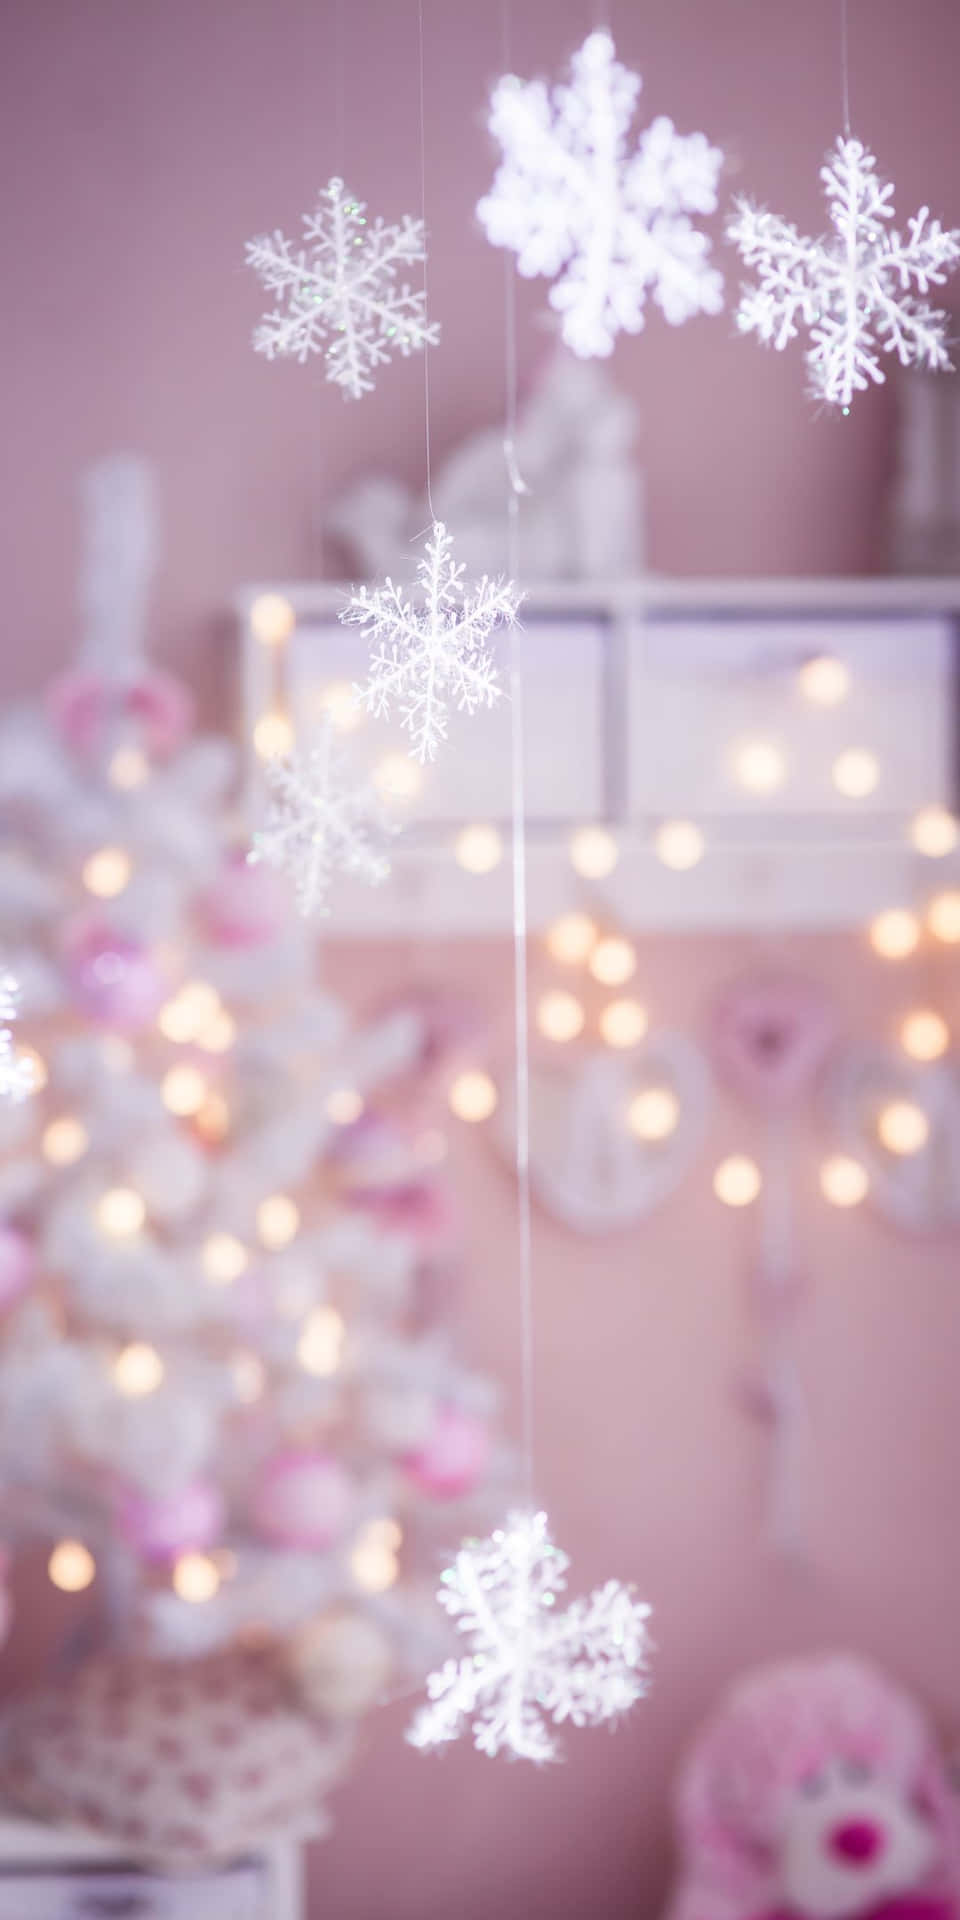 A Room With Snowflakes Hanging From The Ceiling